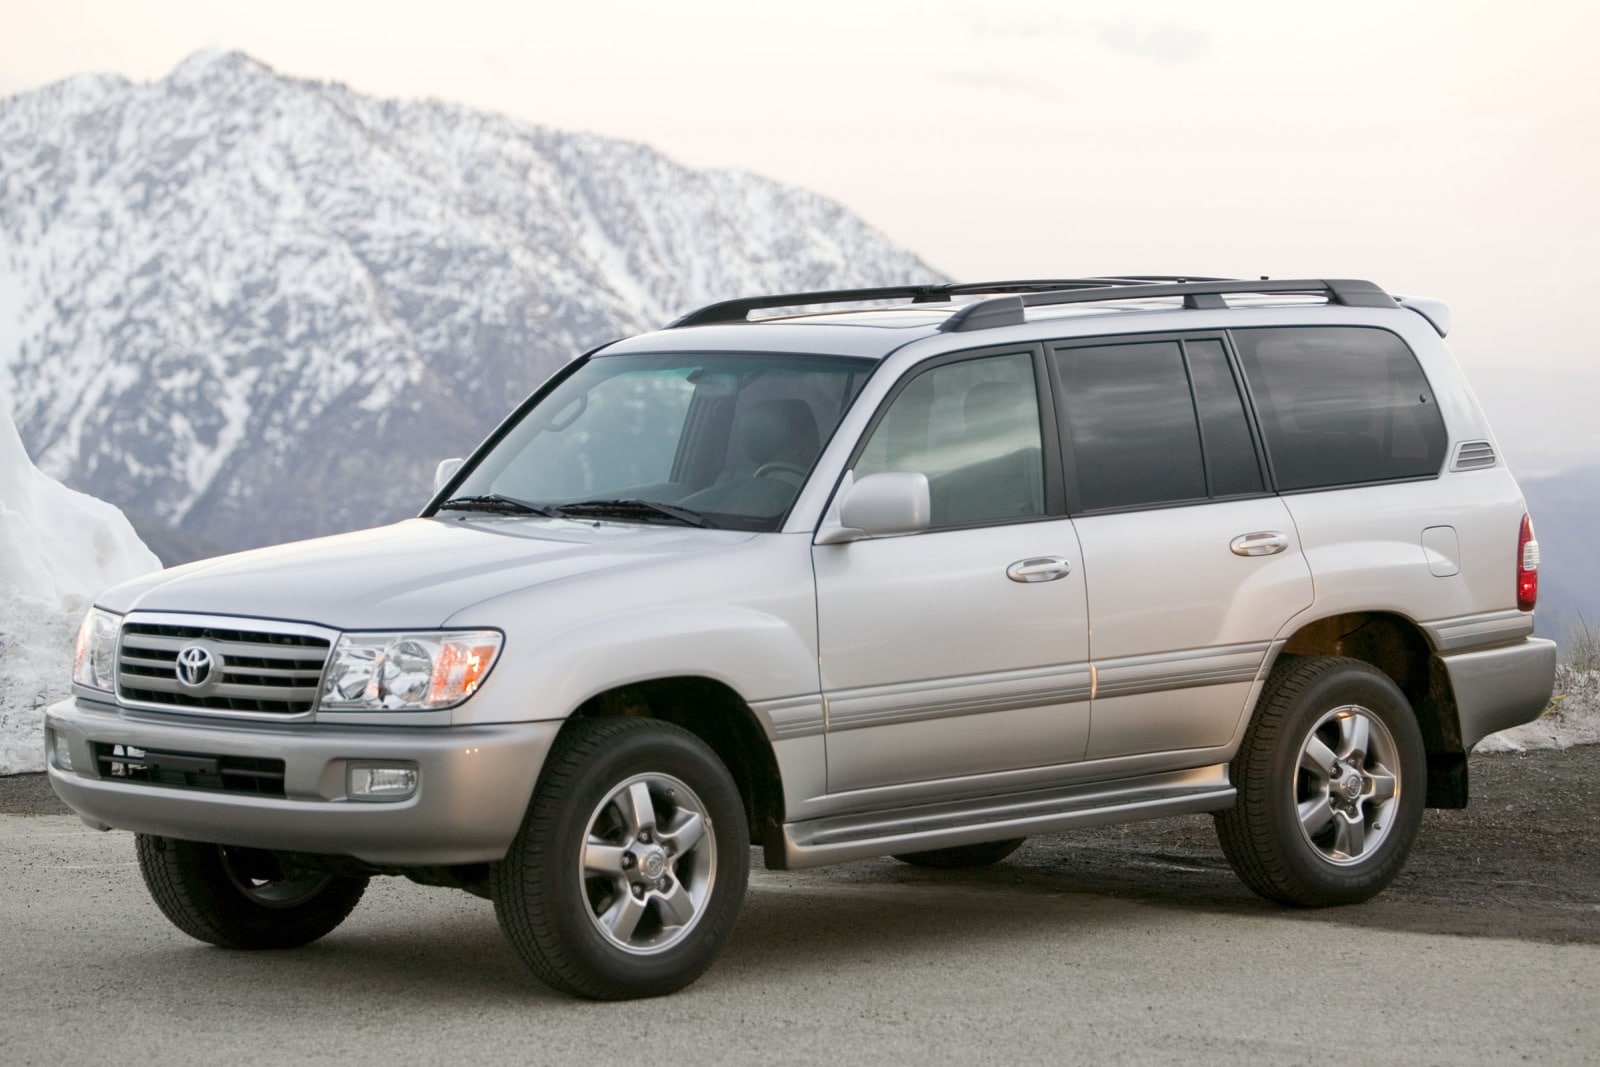 2007 Toyota Land Cruiser Review & Ratings | Edmunds